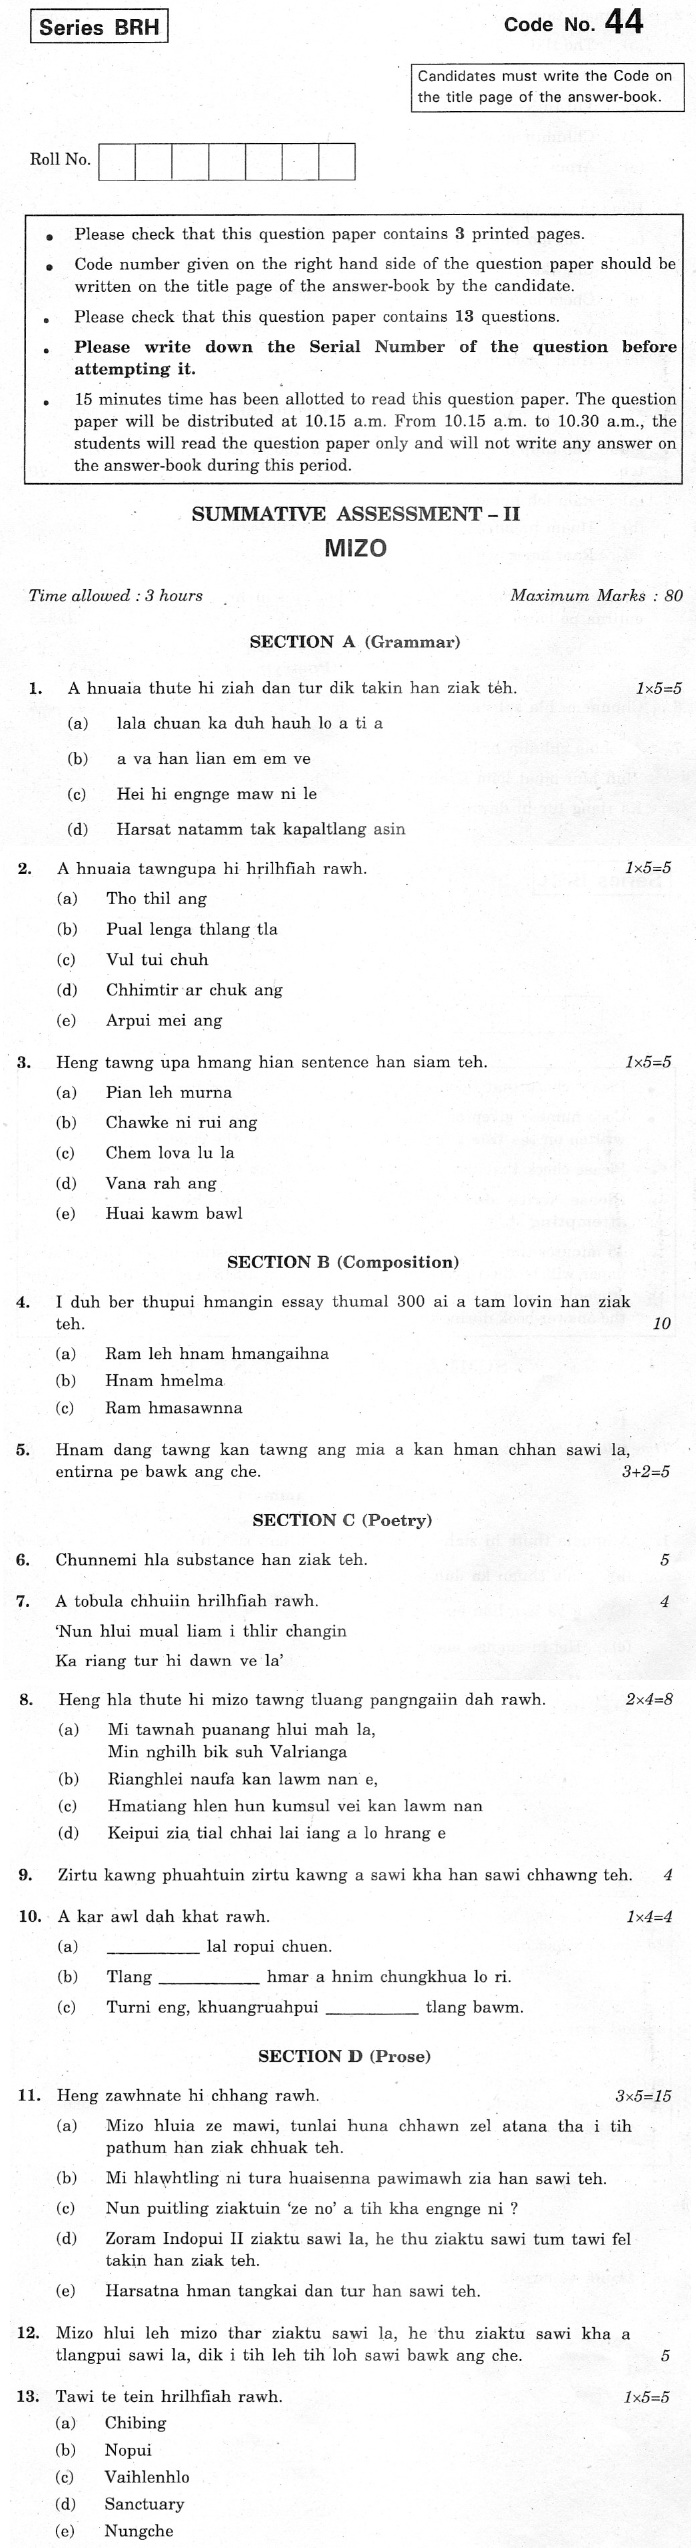 CBSE Class X Previous Year Question Papers 2012 Mizo